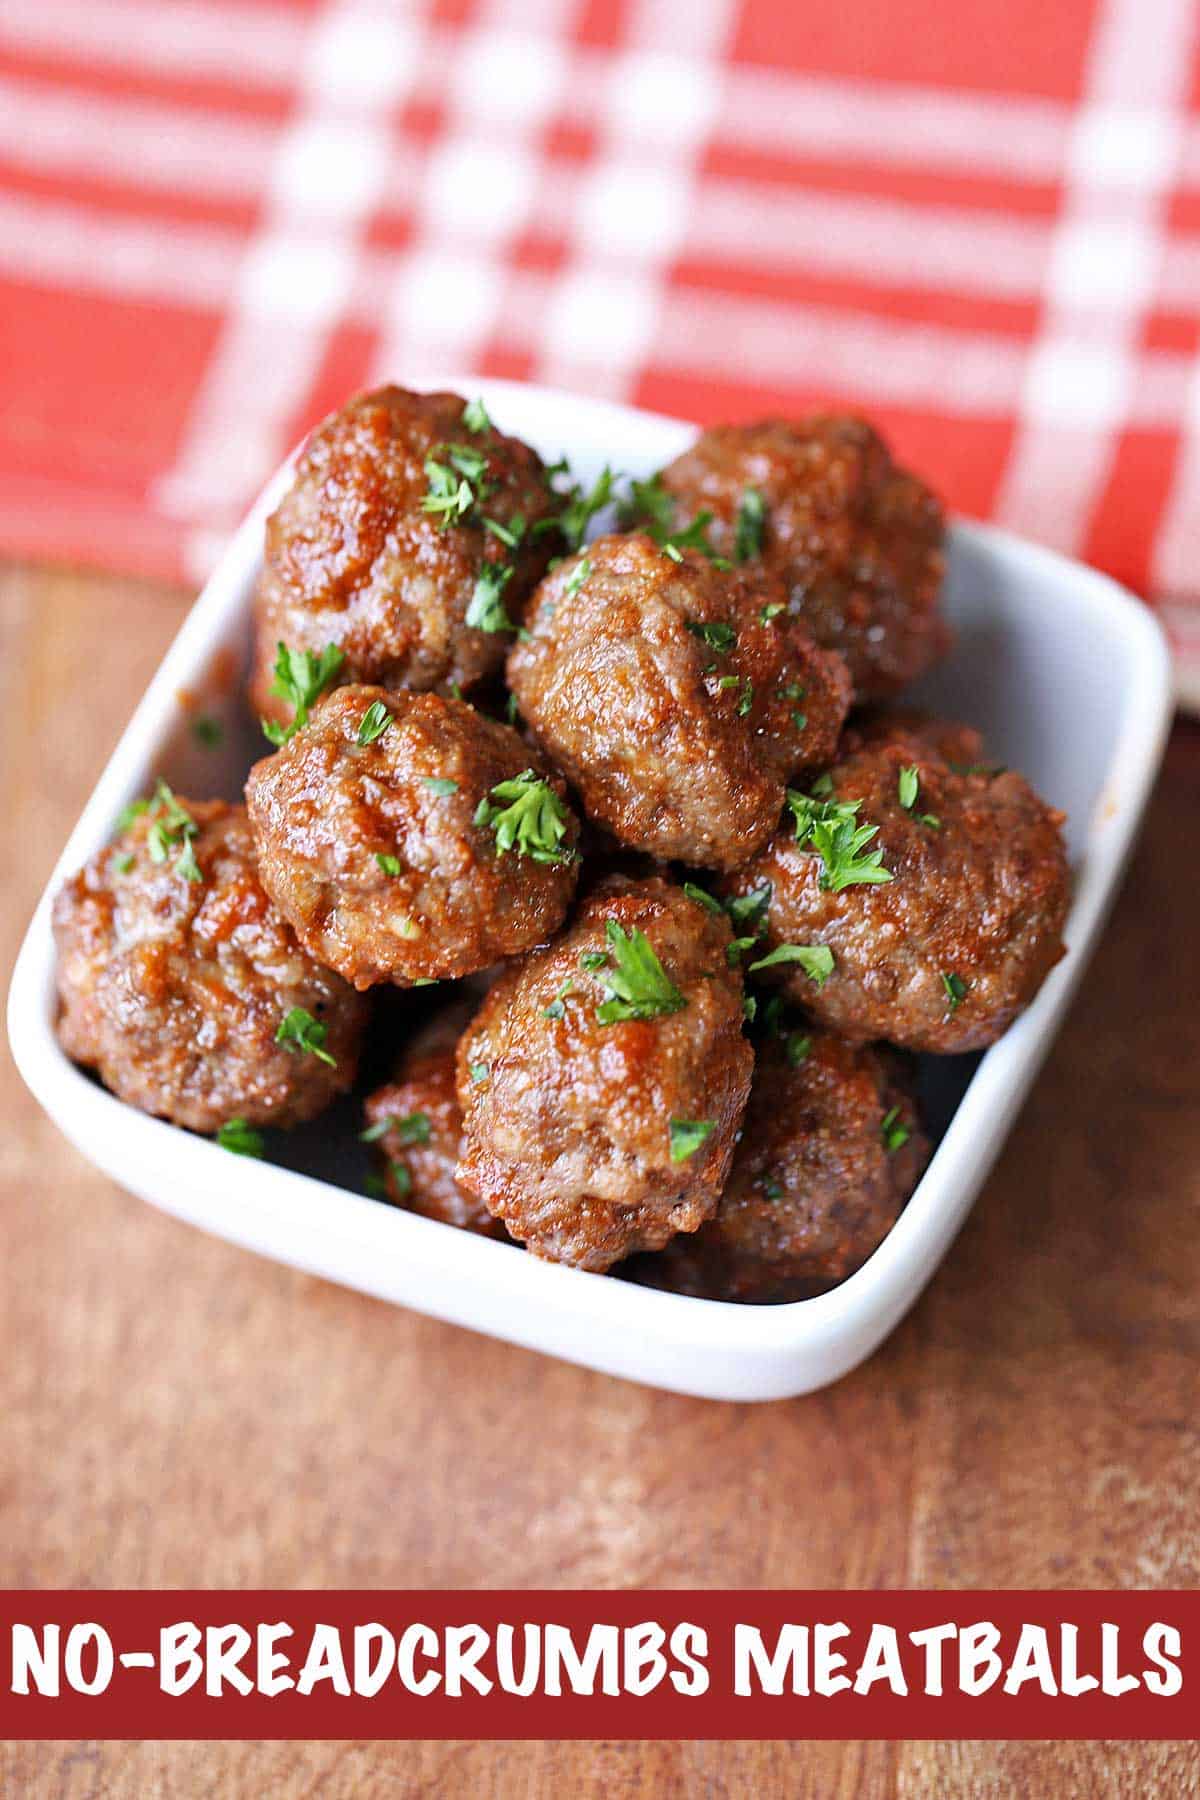 Meatballs without breadcrumbs served in a bowl.